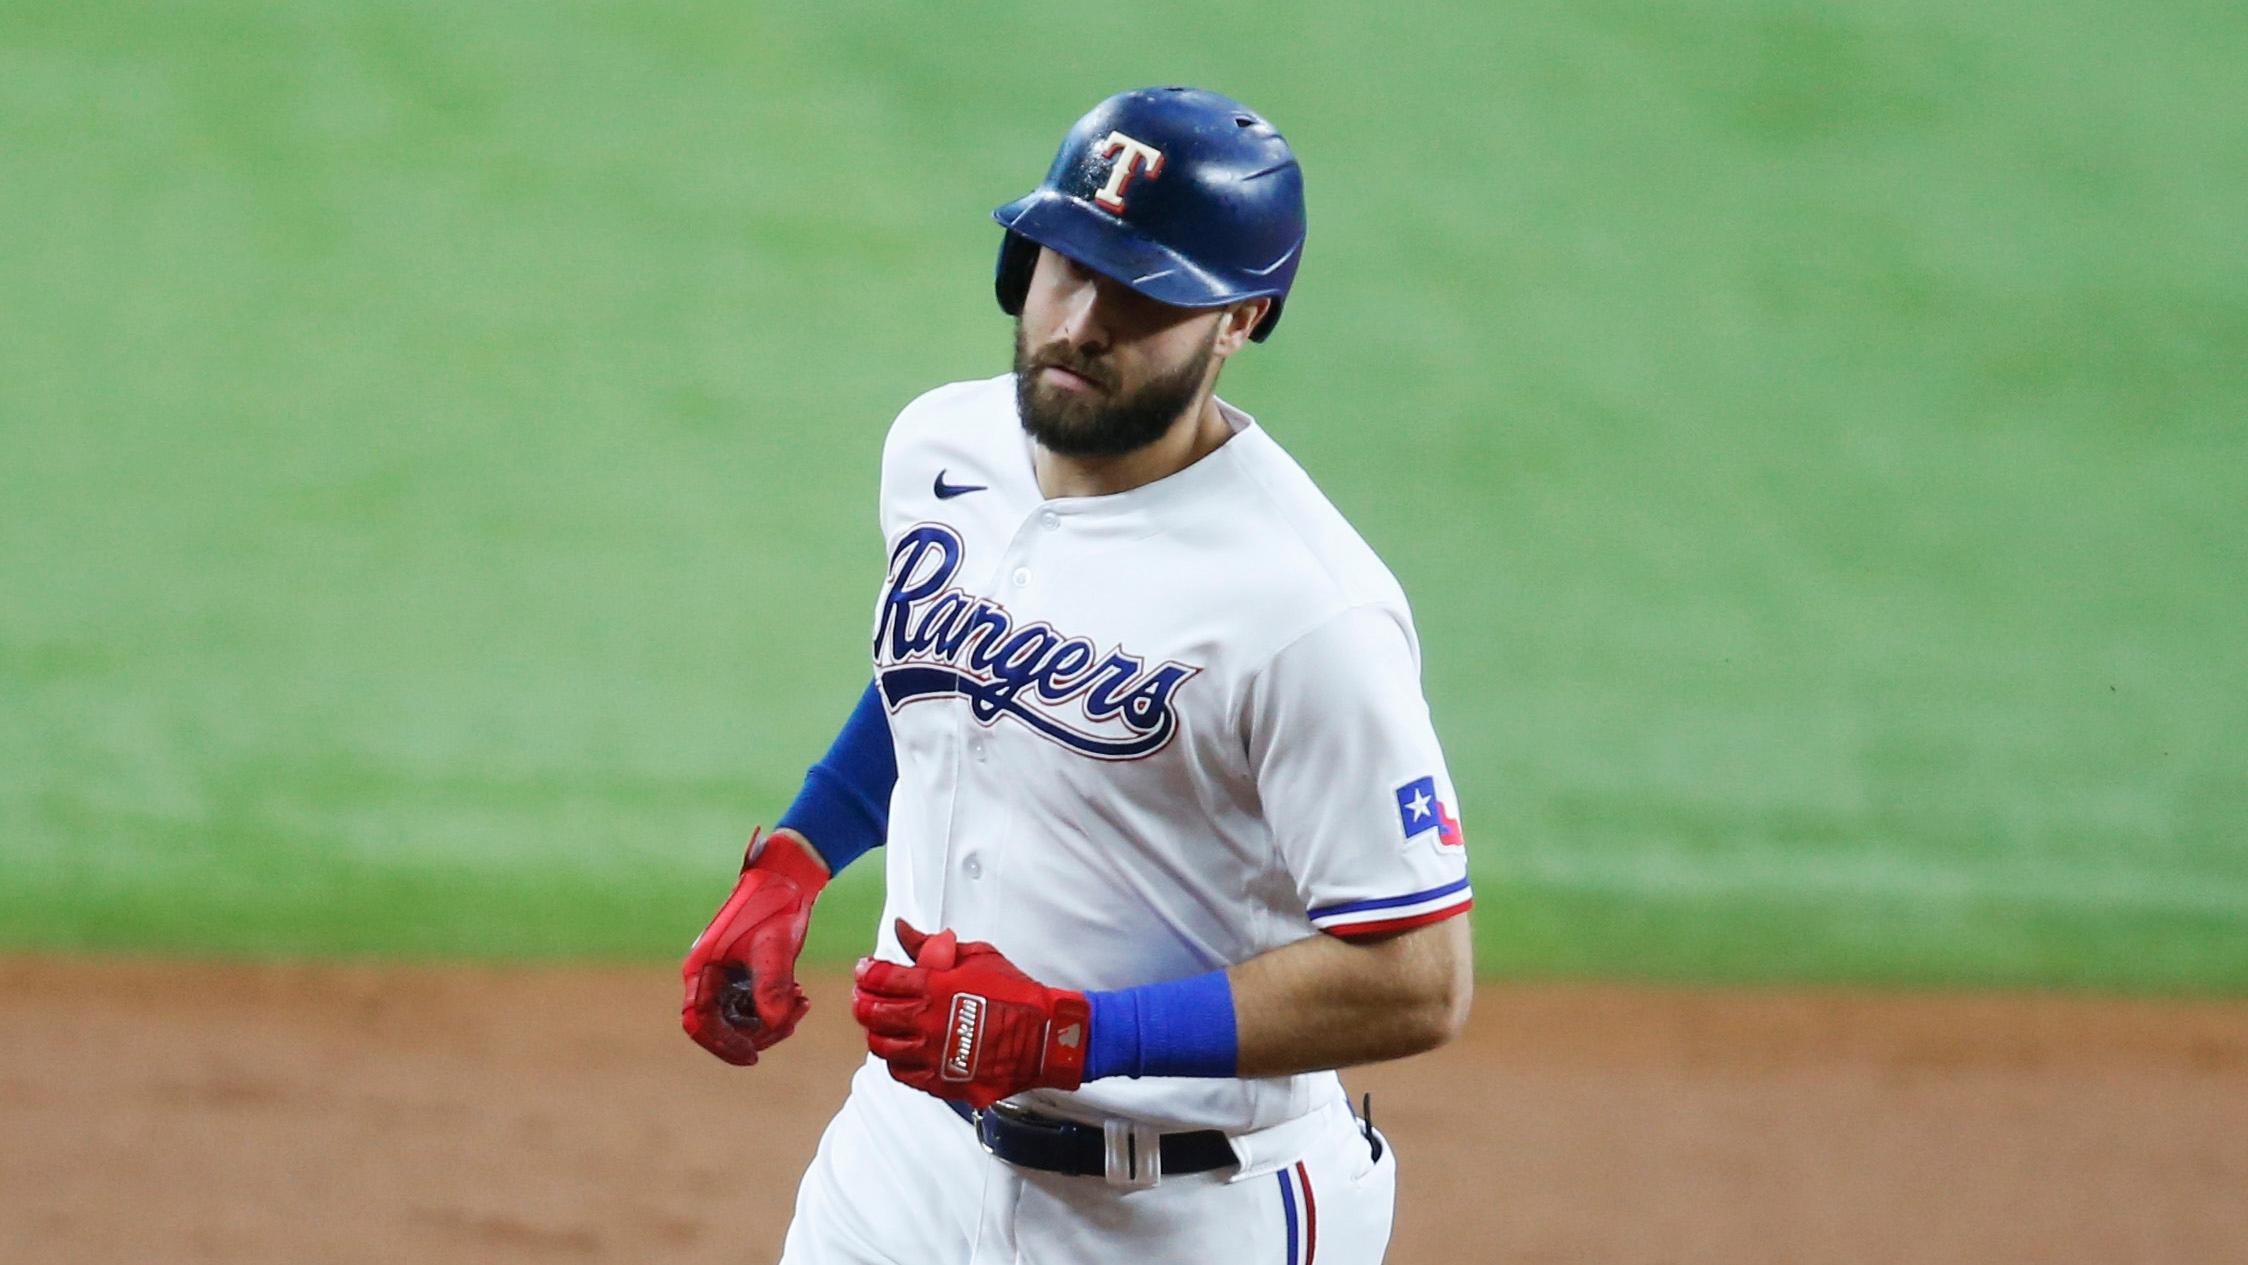 Jul 10, 2021; Arlington, Texas, USA; Texas Rangers designated hitter Joey Gallo (13) rounds the bases after a home run in the first inning against the Oakland Athletics at Globe Life Field. / Tim Heitman-USA TODAY Sports